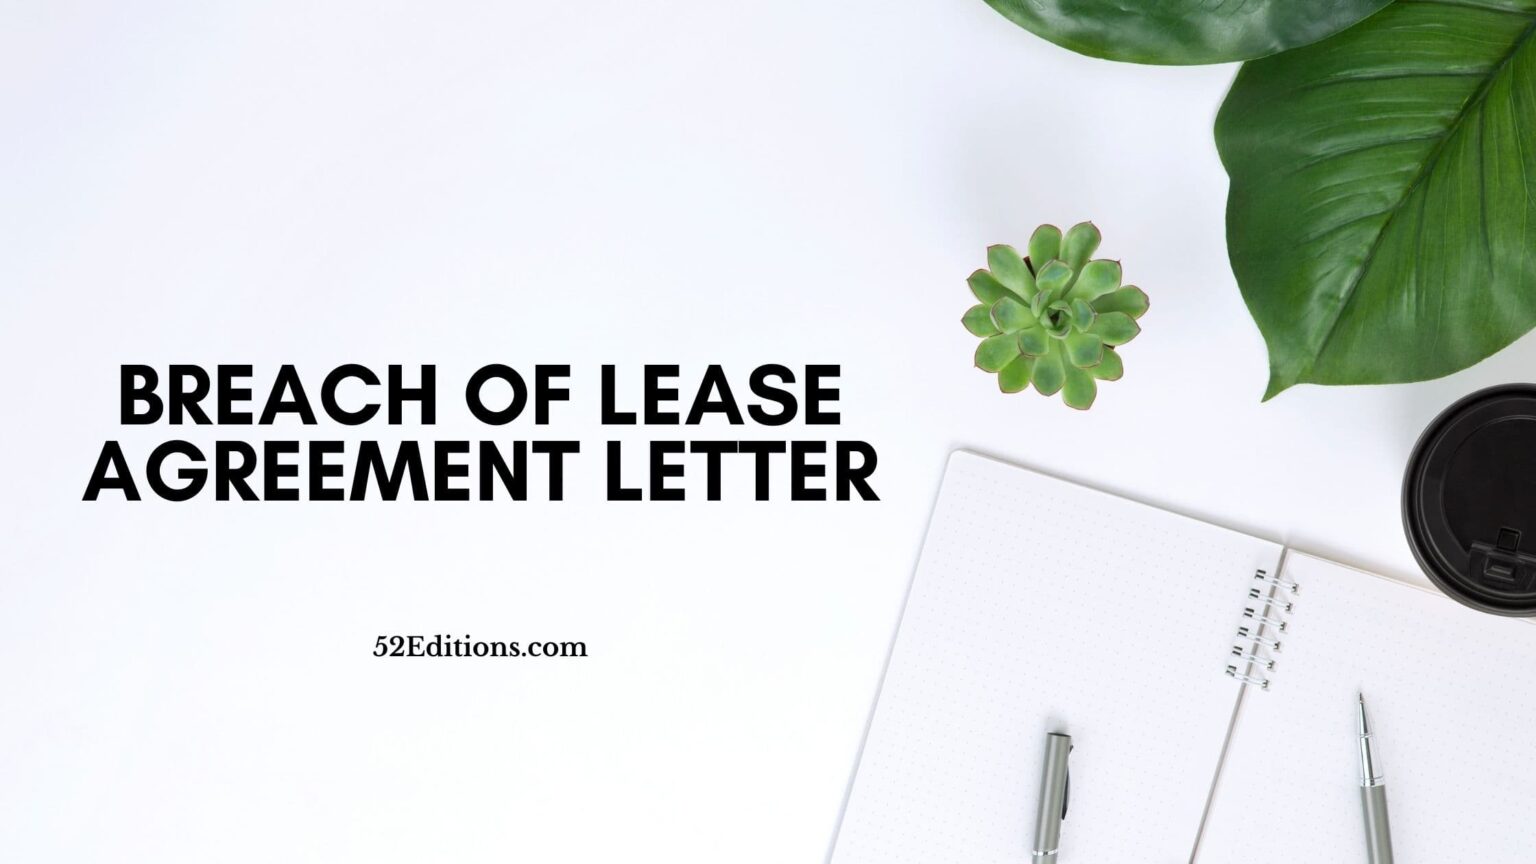 Breach Of Lease Agreement Letter // Get FREE Letter Templates (Print or